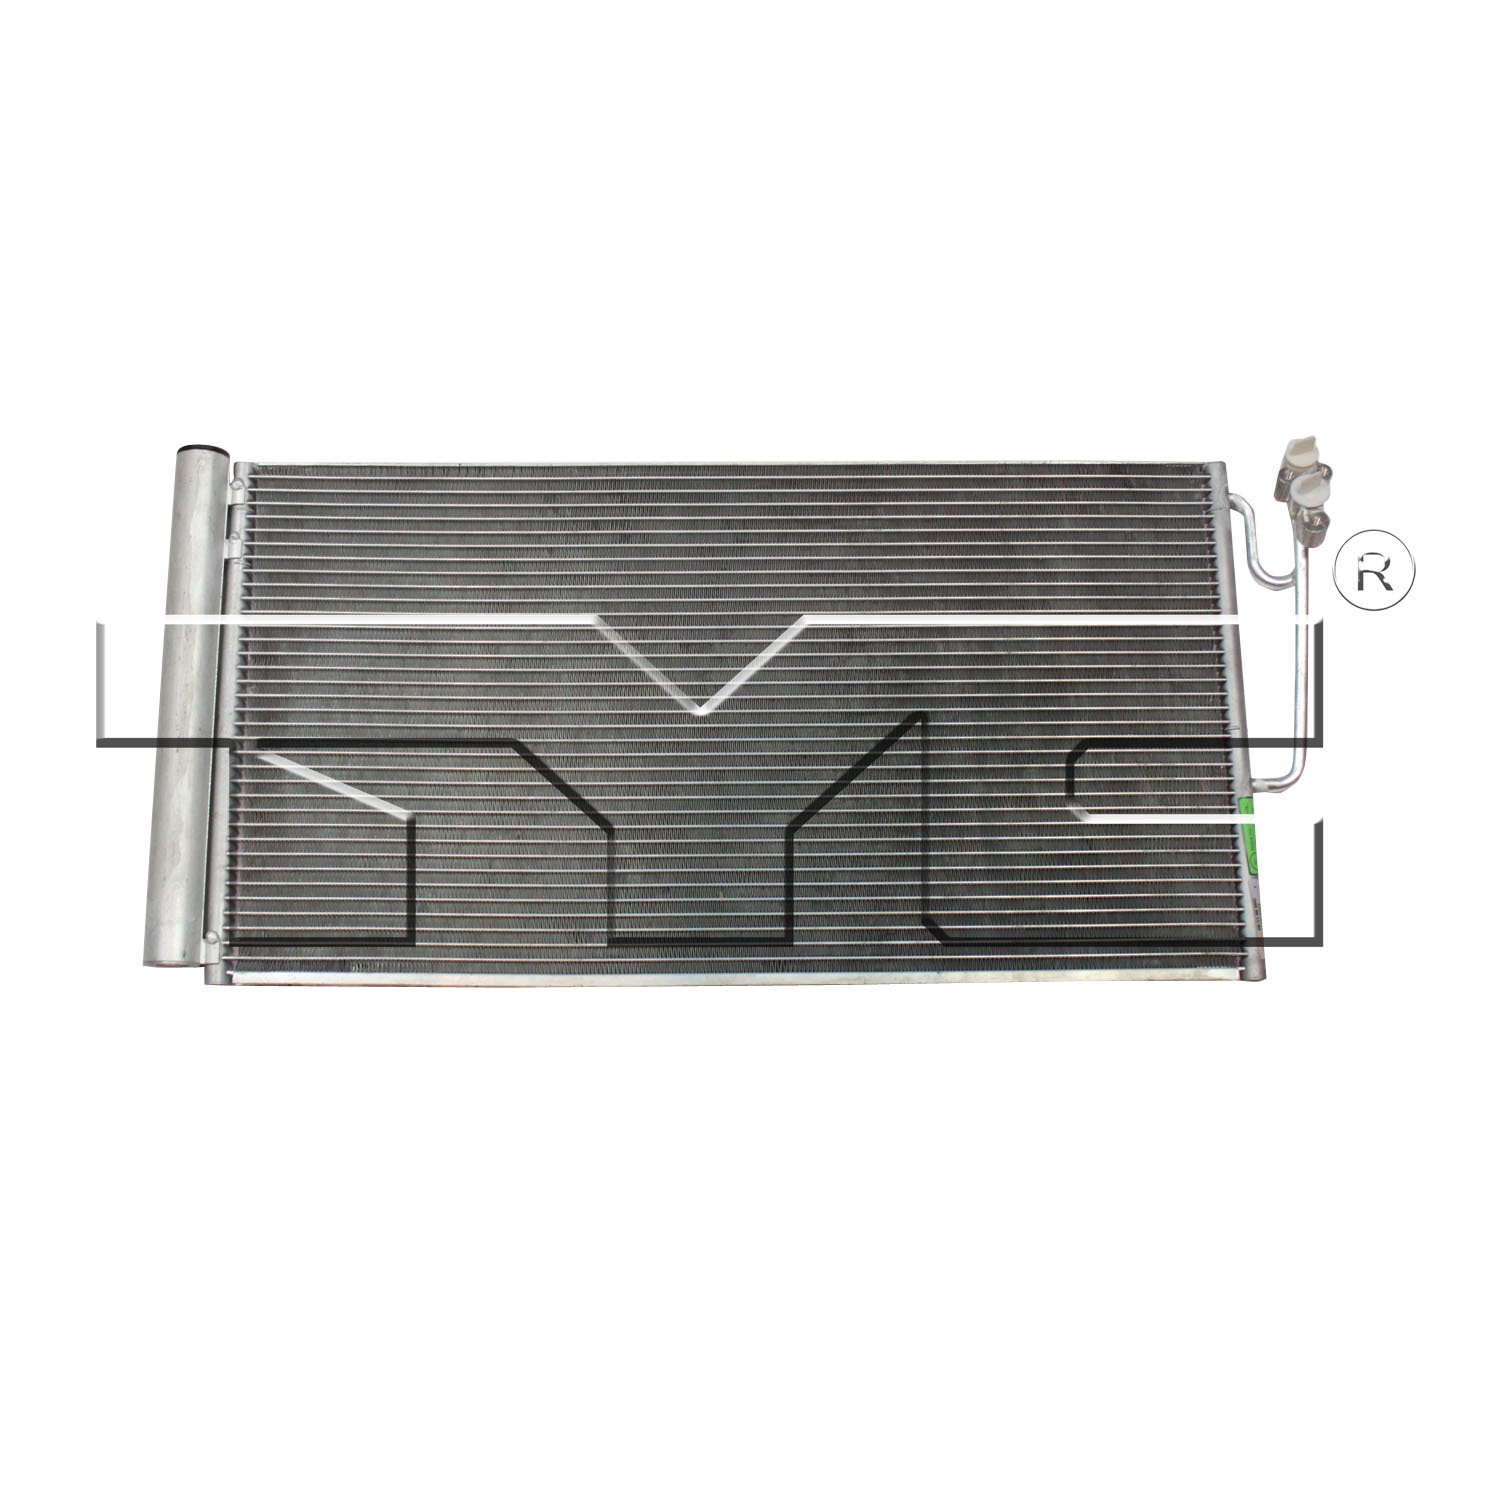 Aftermarket AC CONDENSERS for MINI - COOPER PACEMAN, COOPER PACEMAN,13-16,Air conditioning condenser